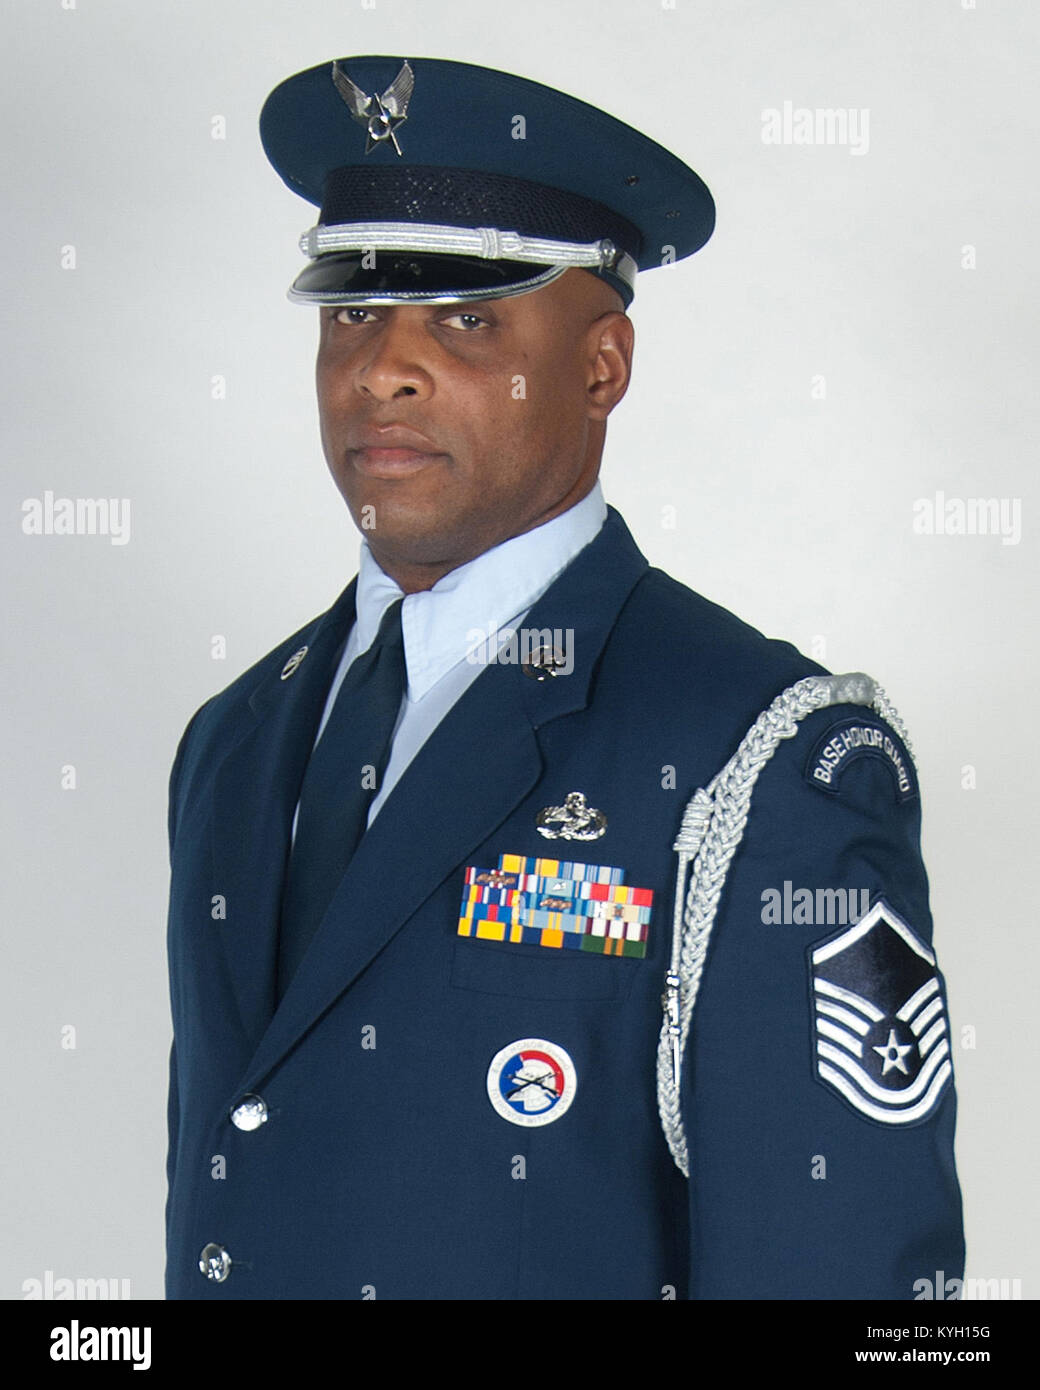 Master Sgt. Mark Hamilton has been selected as the Kentucky Air National Guard’s 2012 Honor Guard Manger of the Year. He performed more than 100 details in 2011 and increased membership on the team by 75 percent. (U.S. Air Force photo by Master Sgt. Phil Speck) Stock Photo